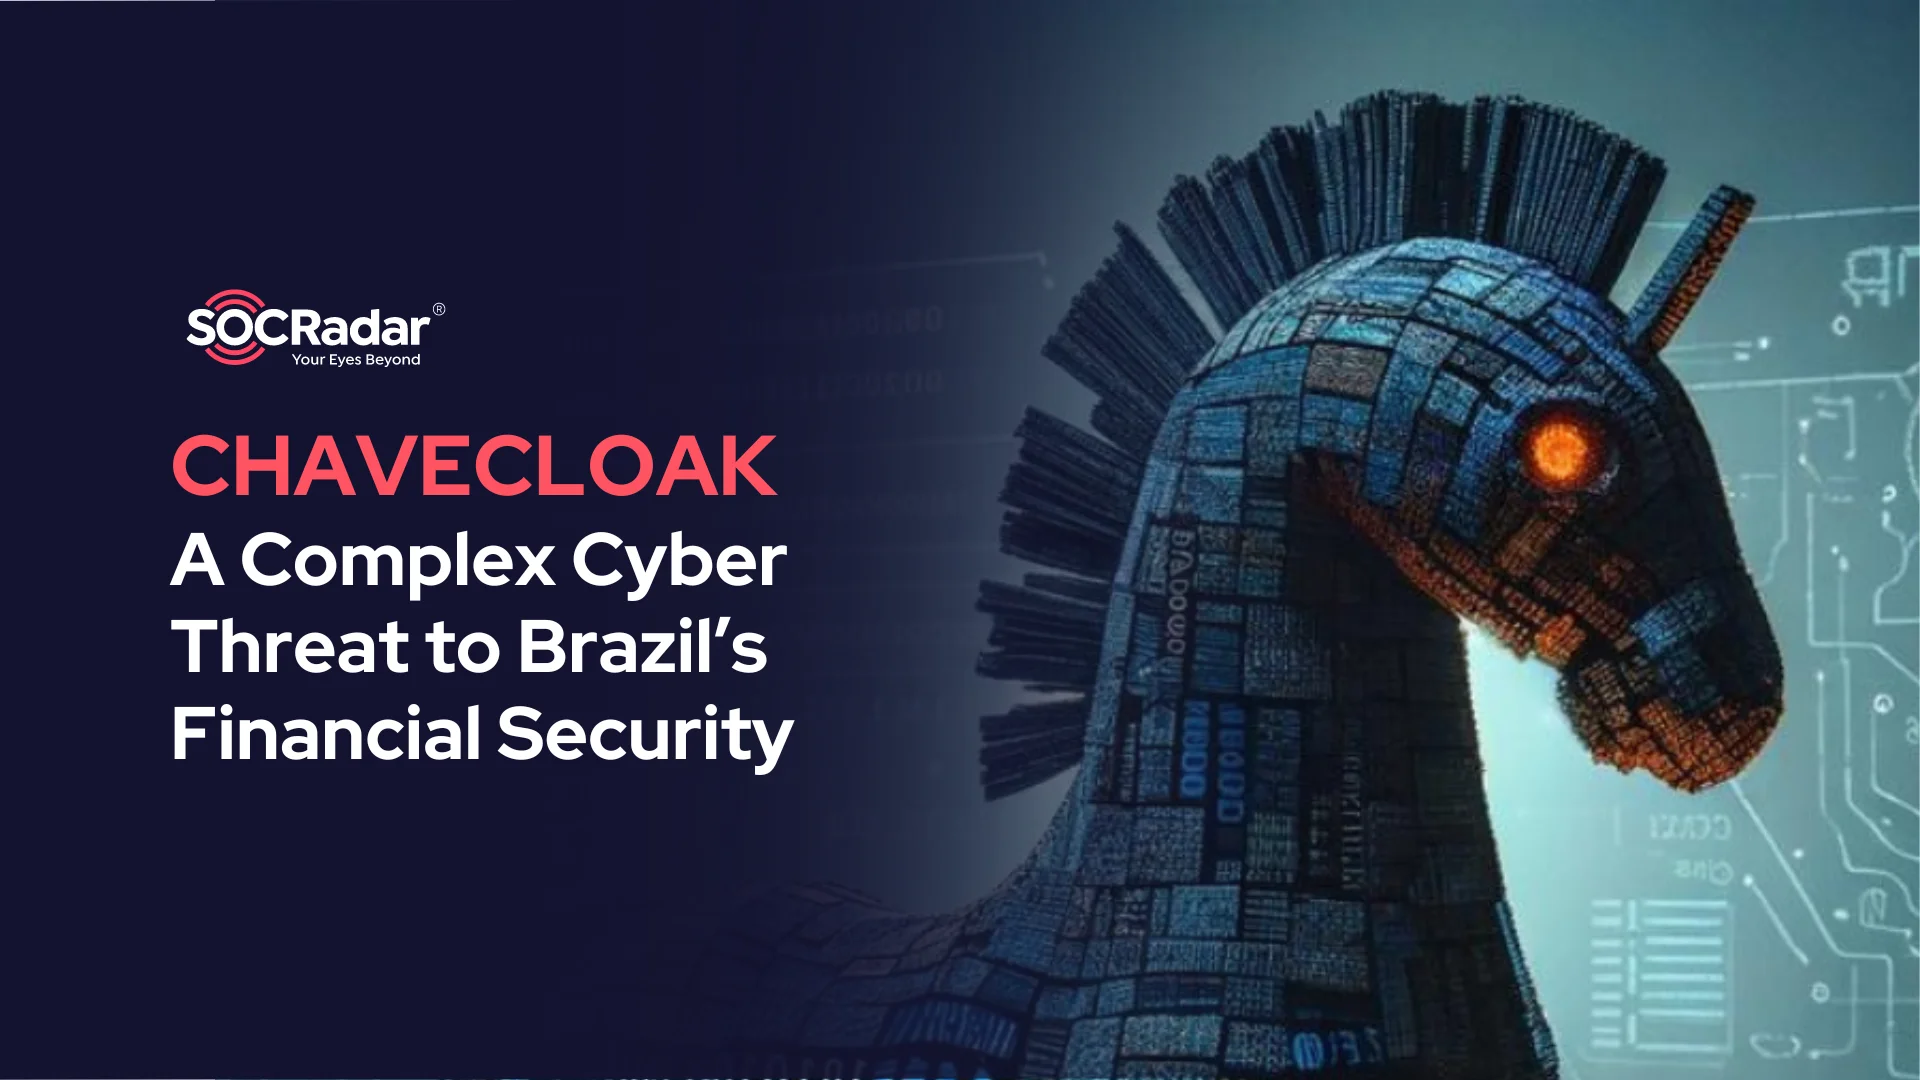 SOCRadar® Cyber Intelligence Inc. | CHAVECLOAK: A Complex Cyber Threat to Brazil’s Financial Security